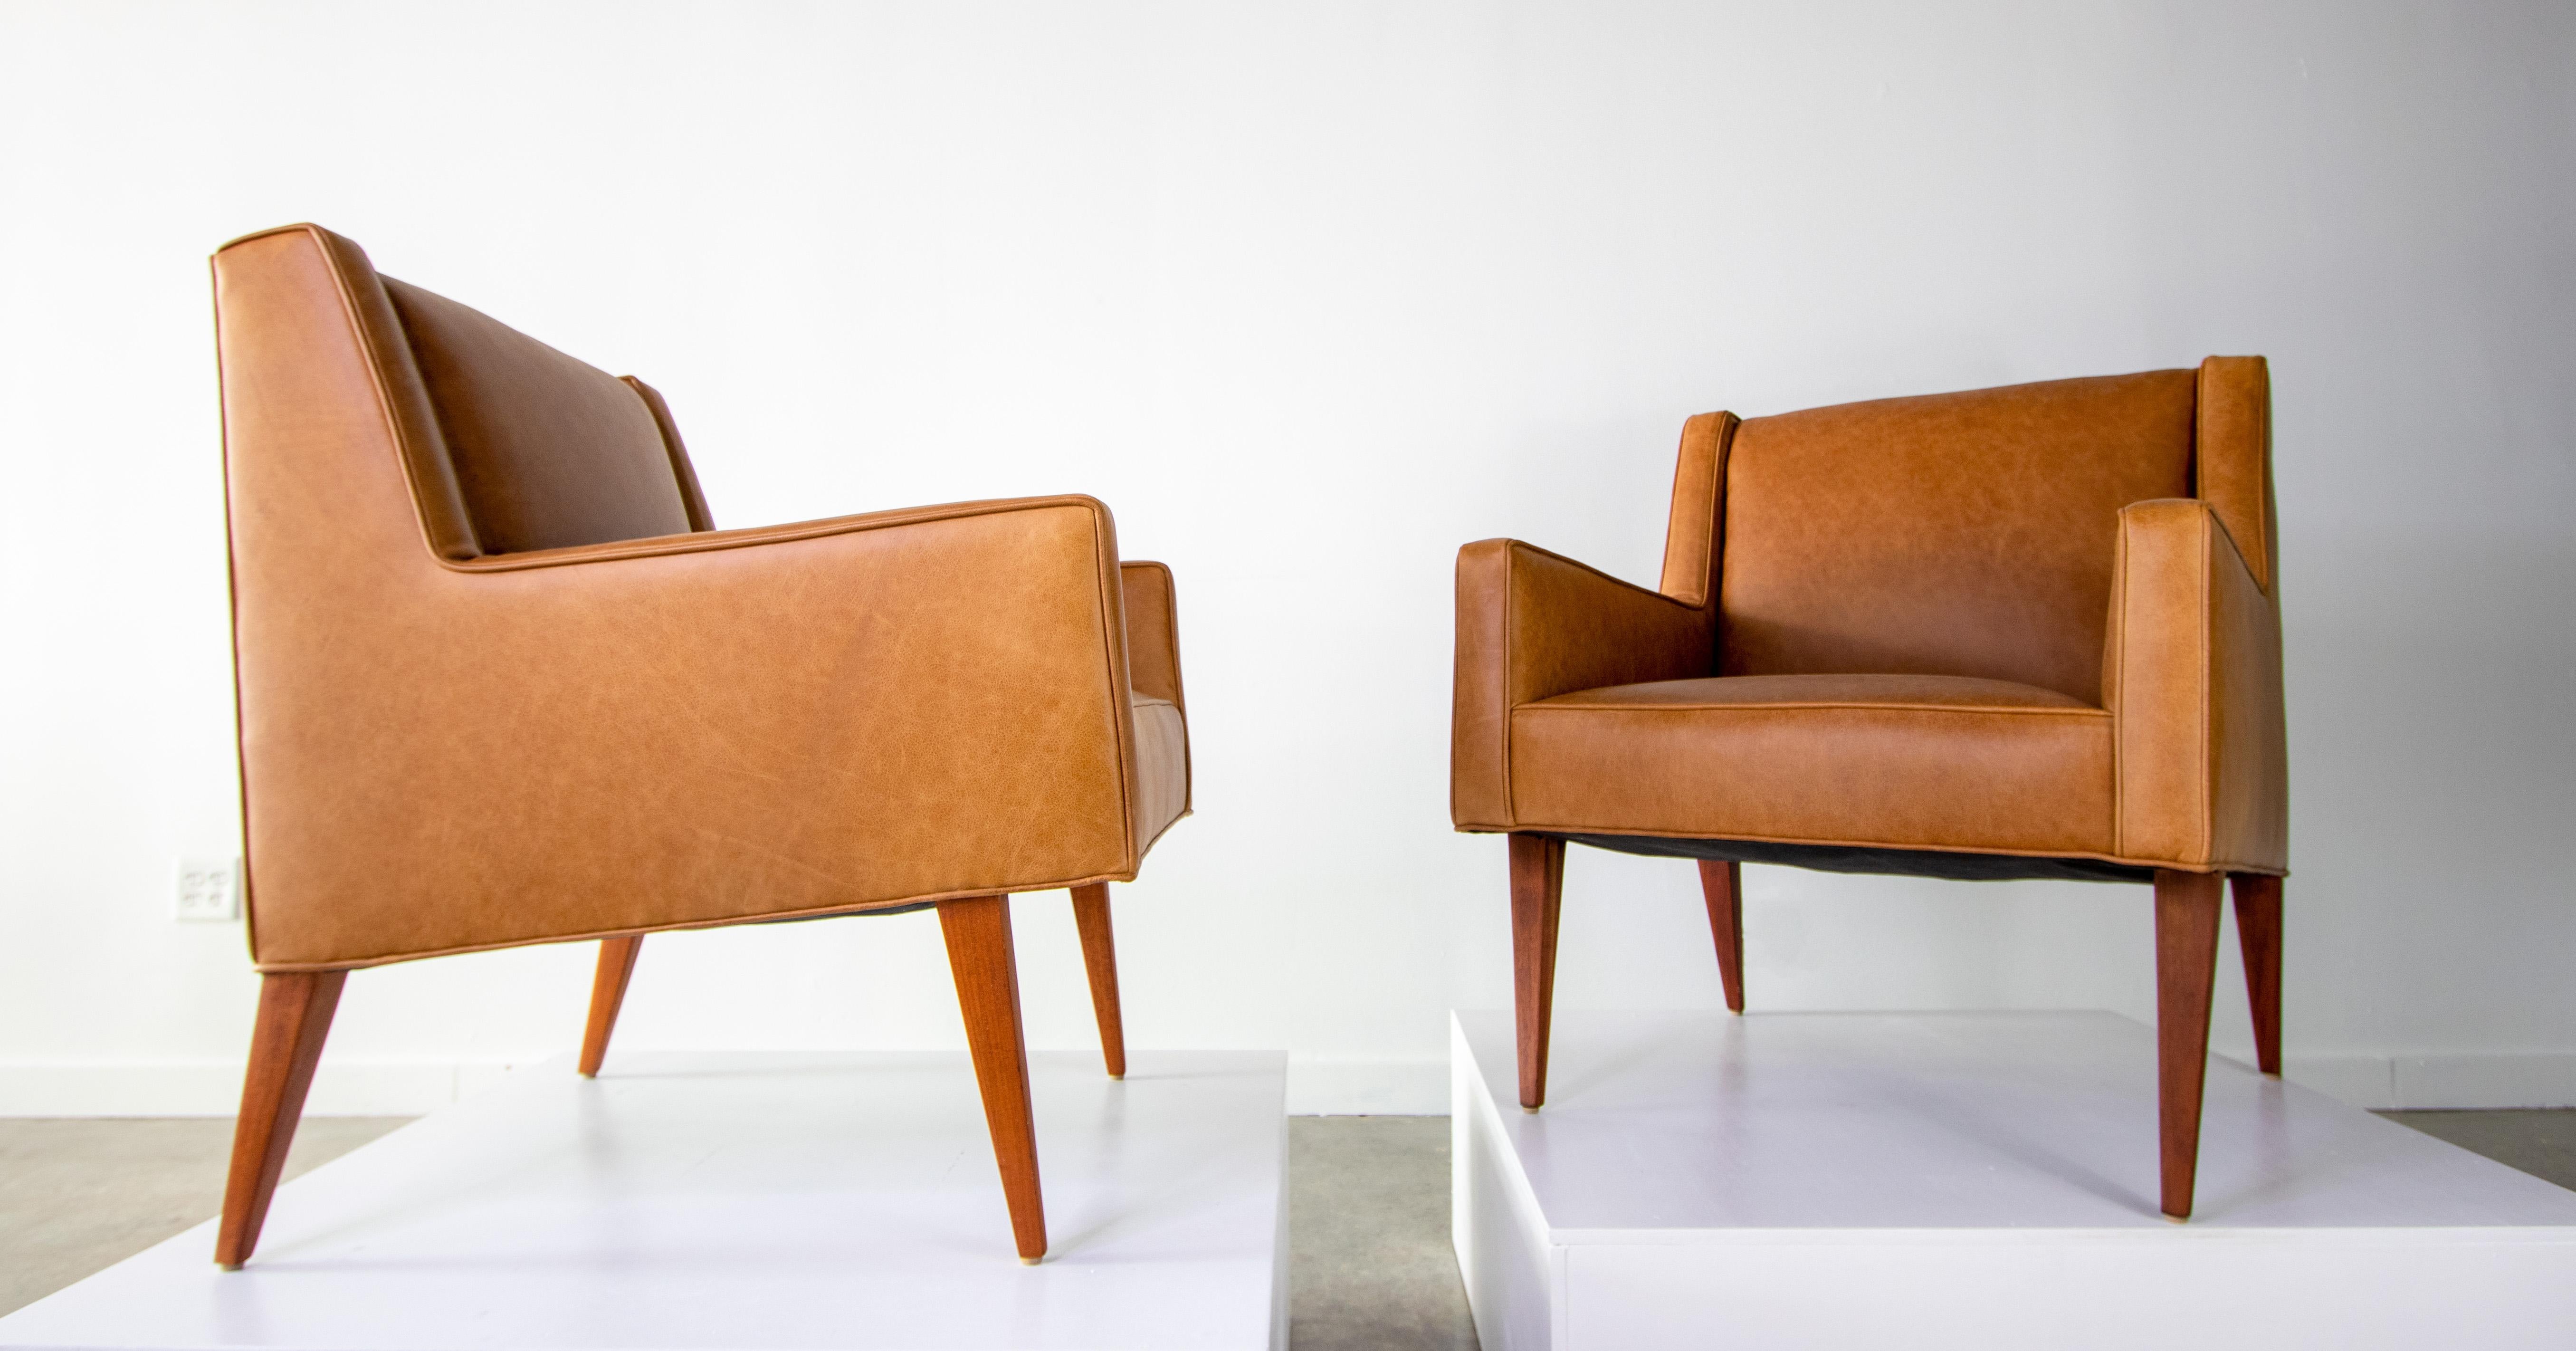 A pair of leather lounge chairs designed by Edward Wormley for Dunbar vintage from the 1950s. These chairs are model 603 and were called the Mrs. Chair in the original catalogue. Higher legs and a more prim and proper look than its mate the Mr.